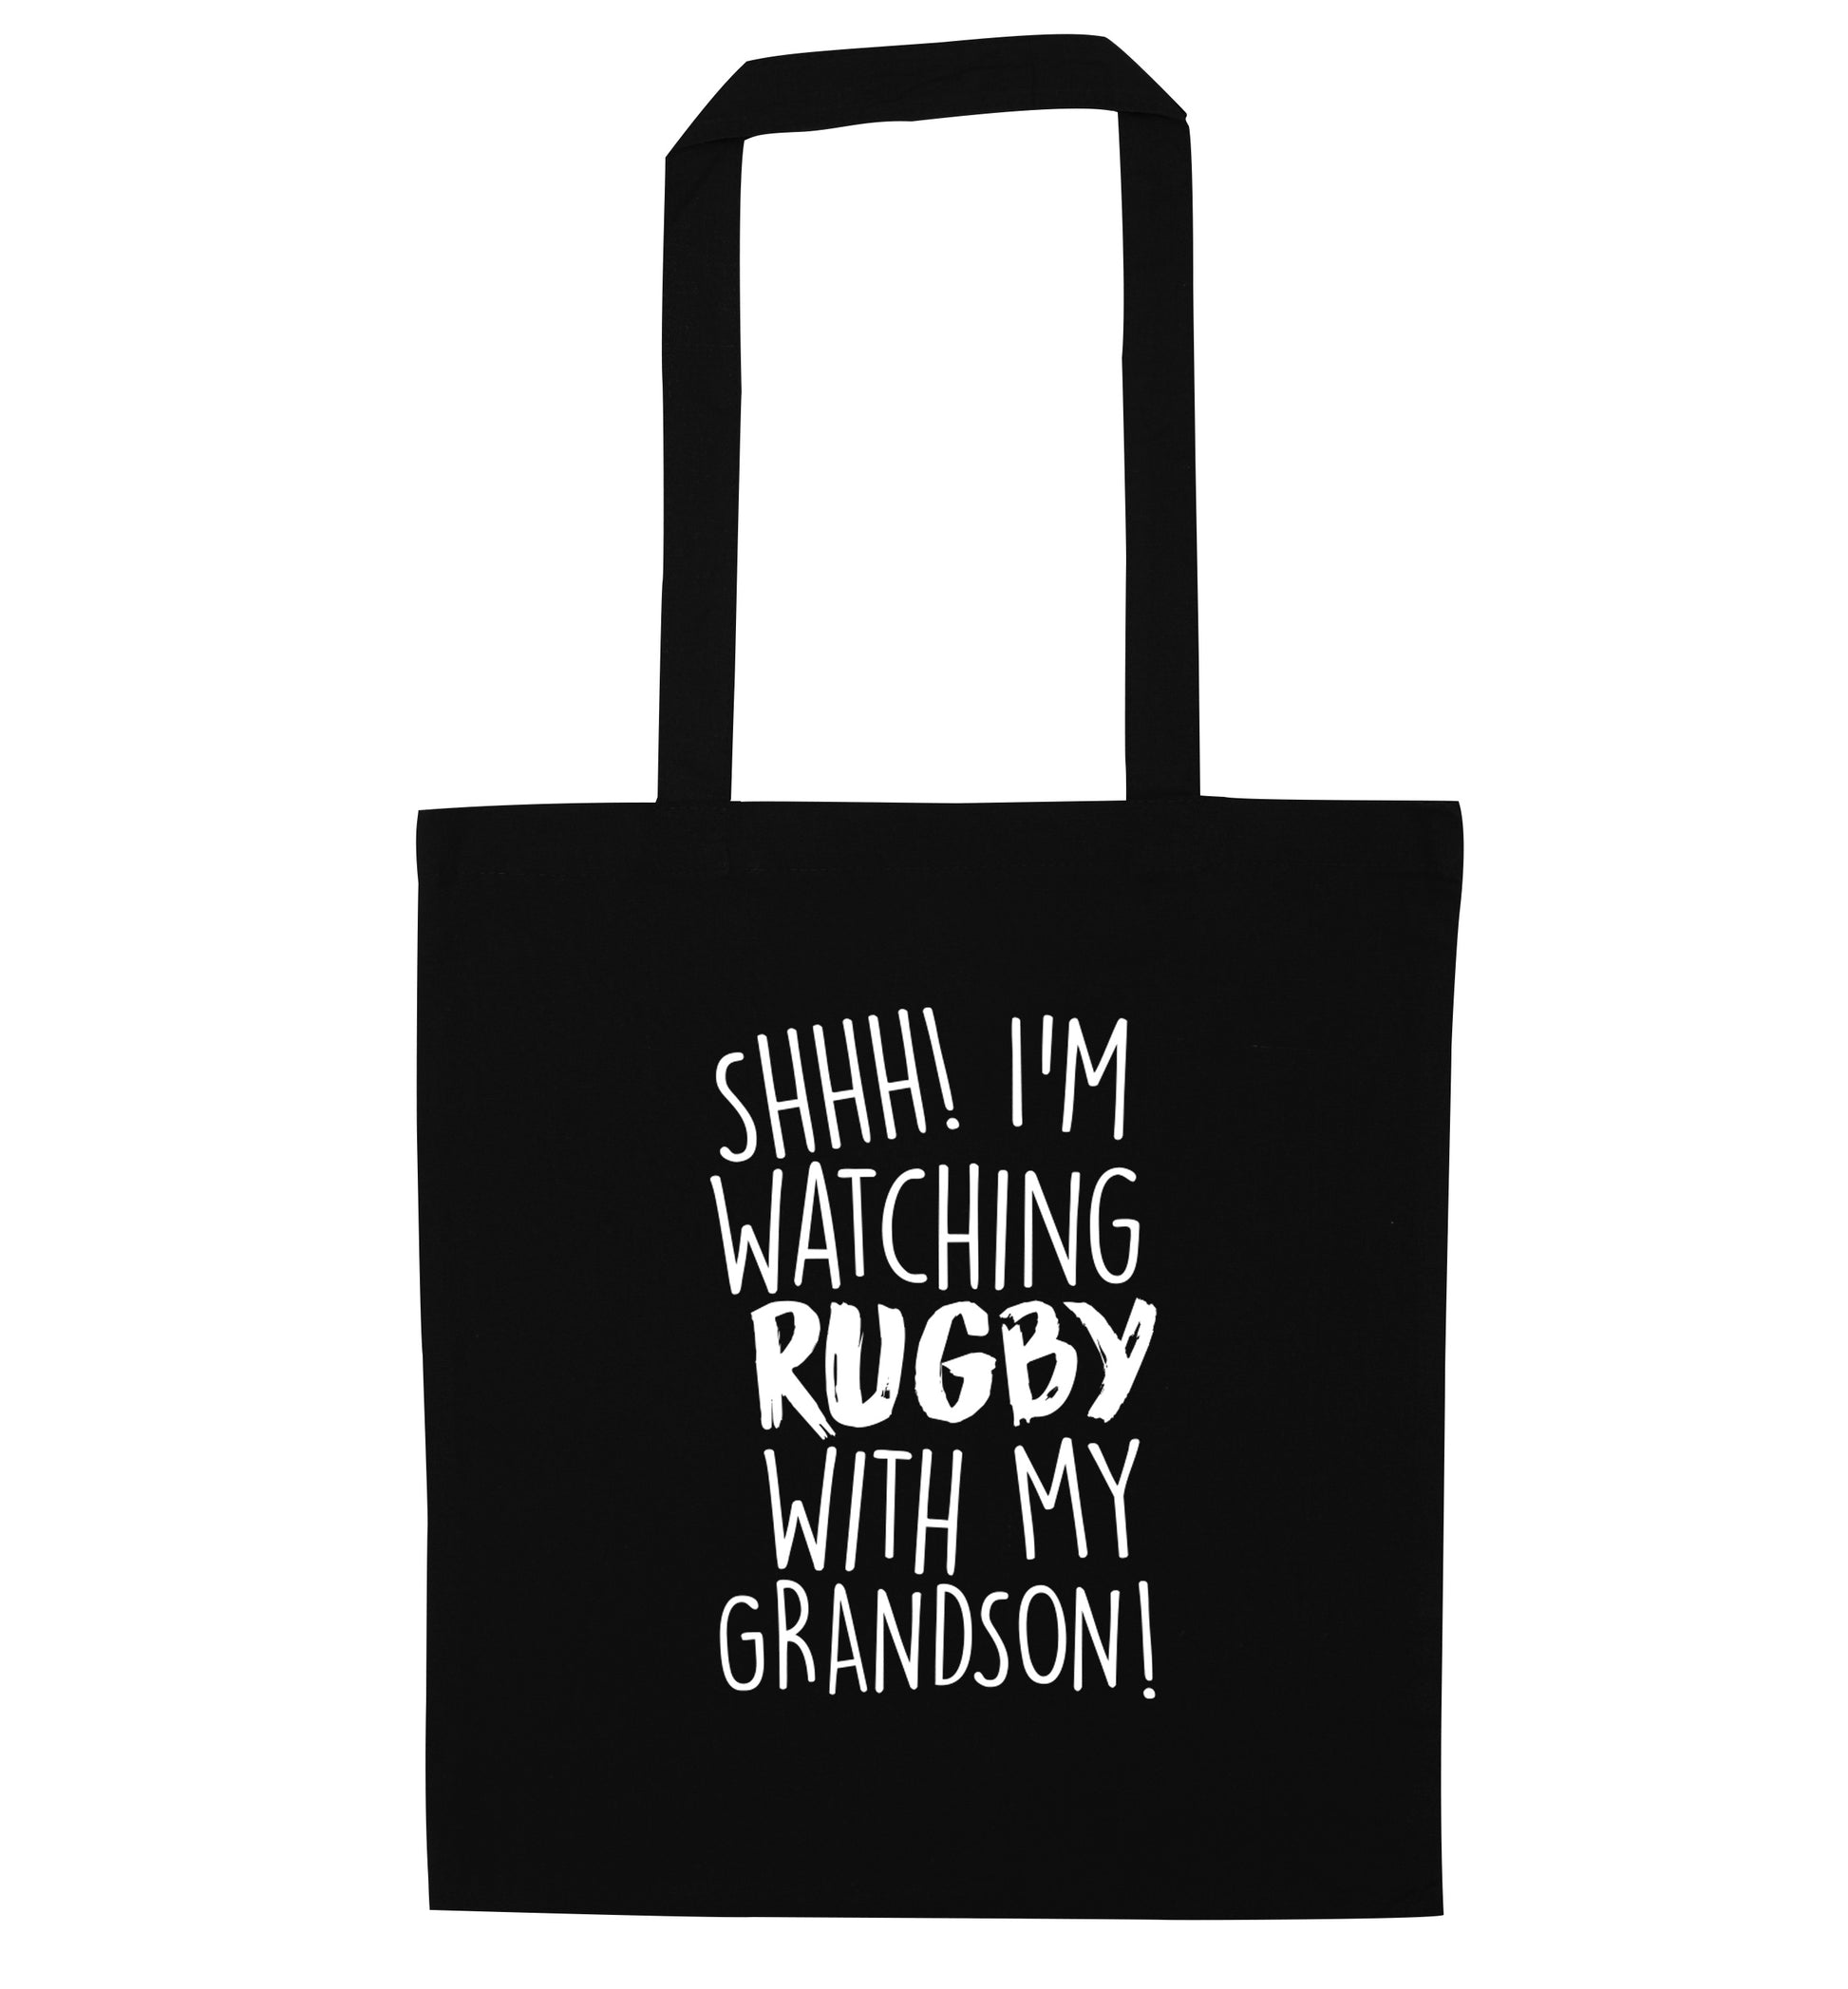 Shh I'm watching rugby with my grandson black tote bag